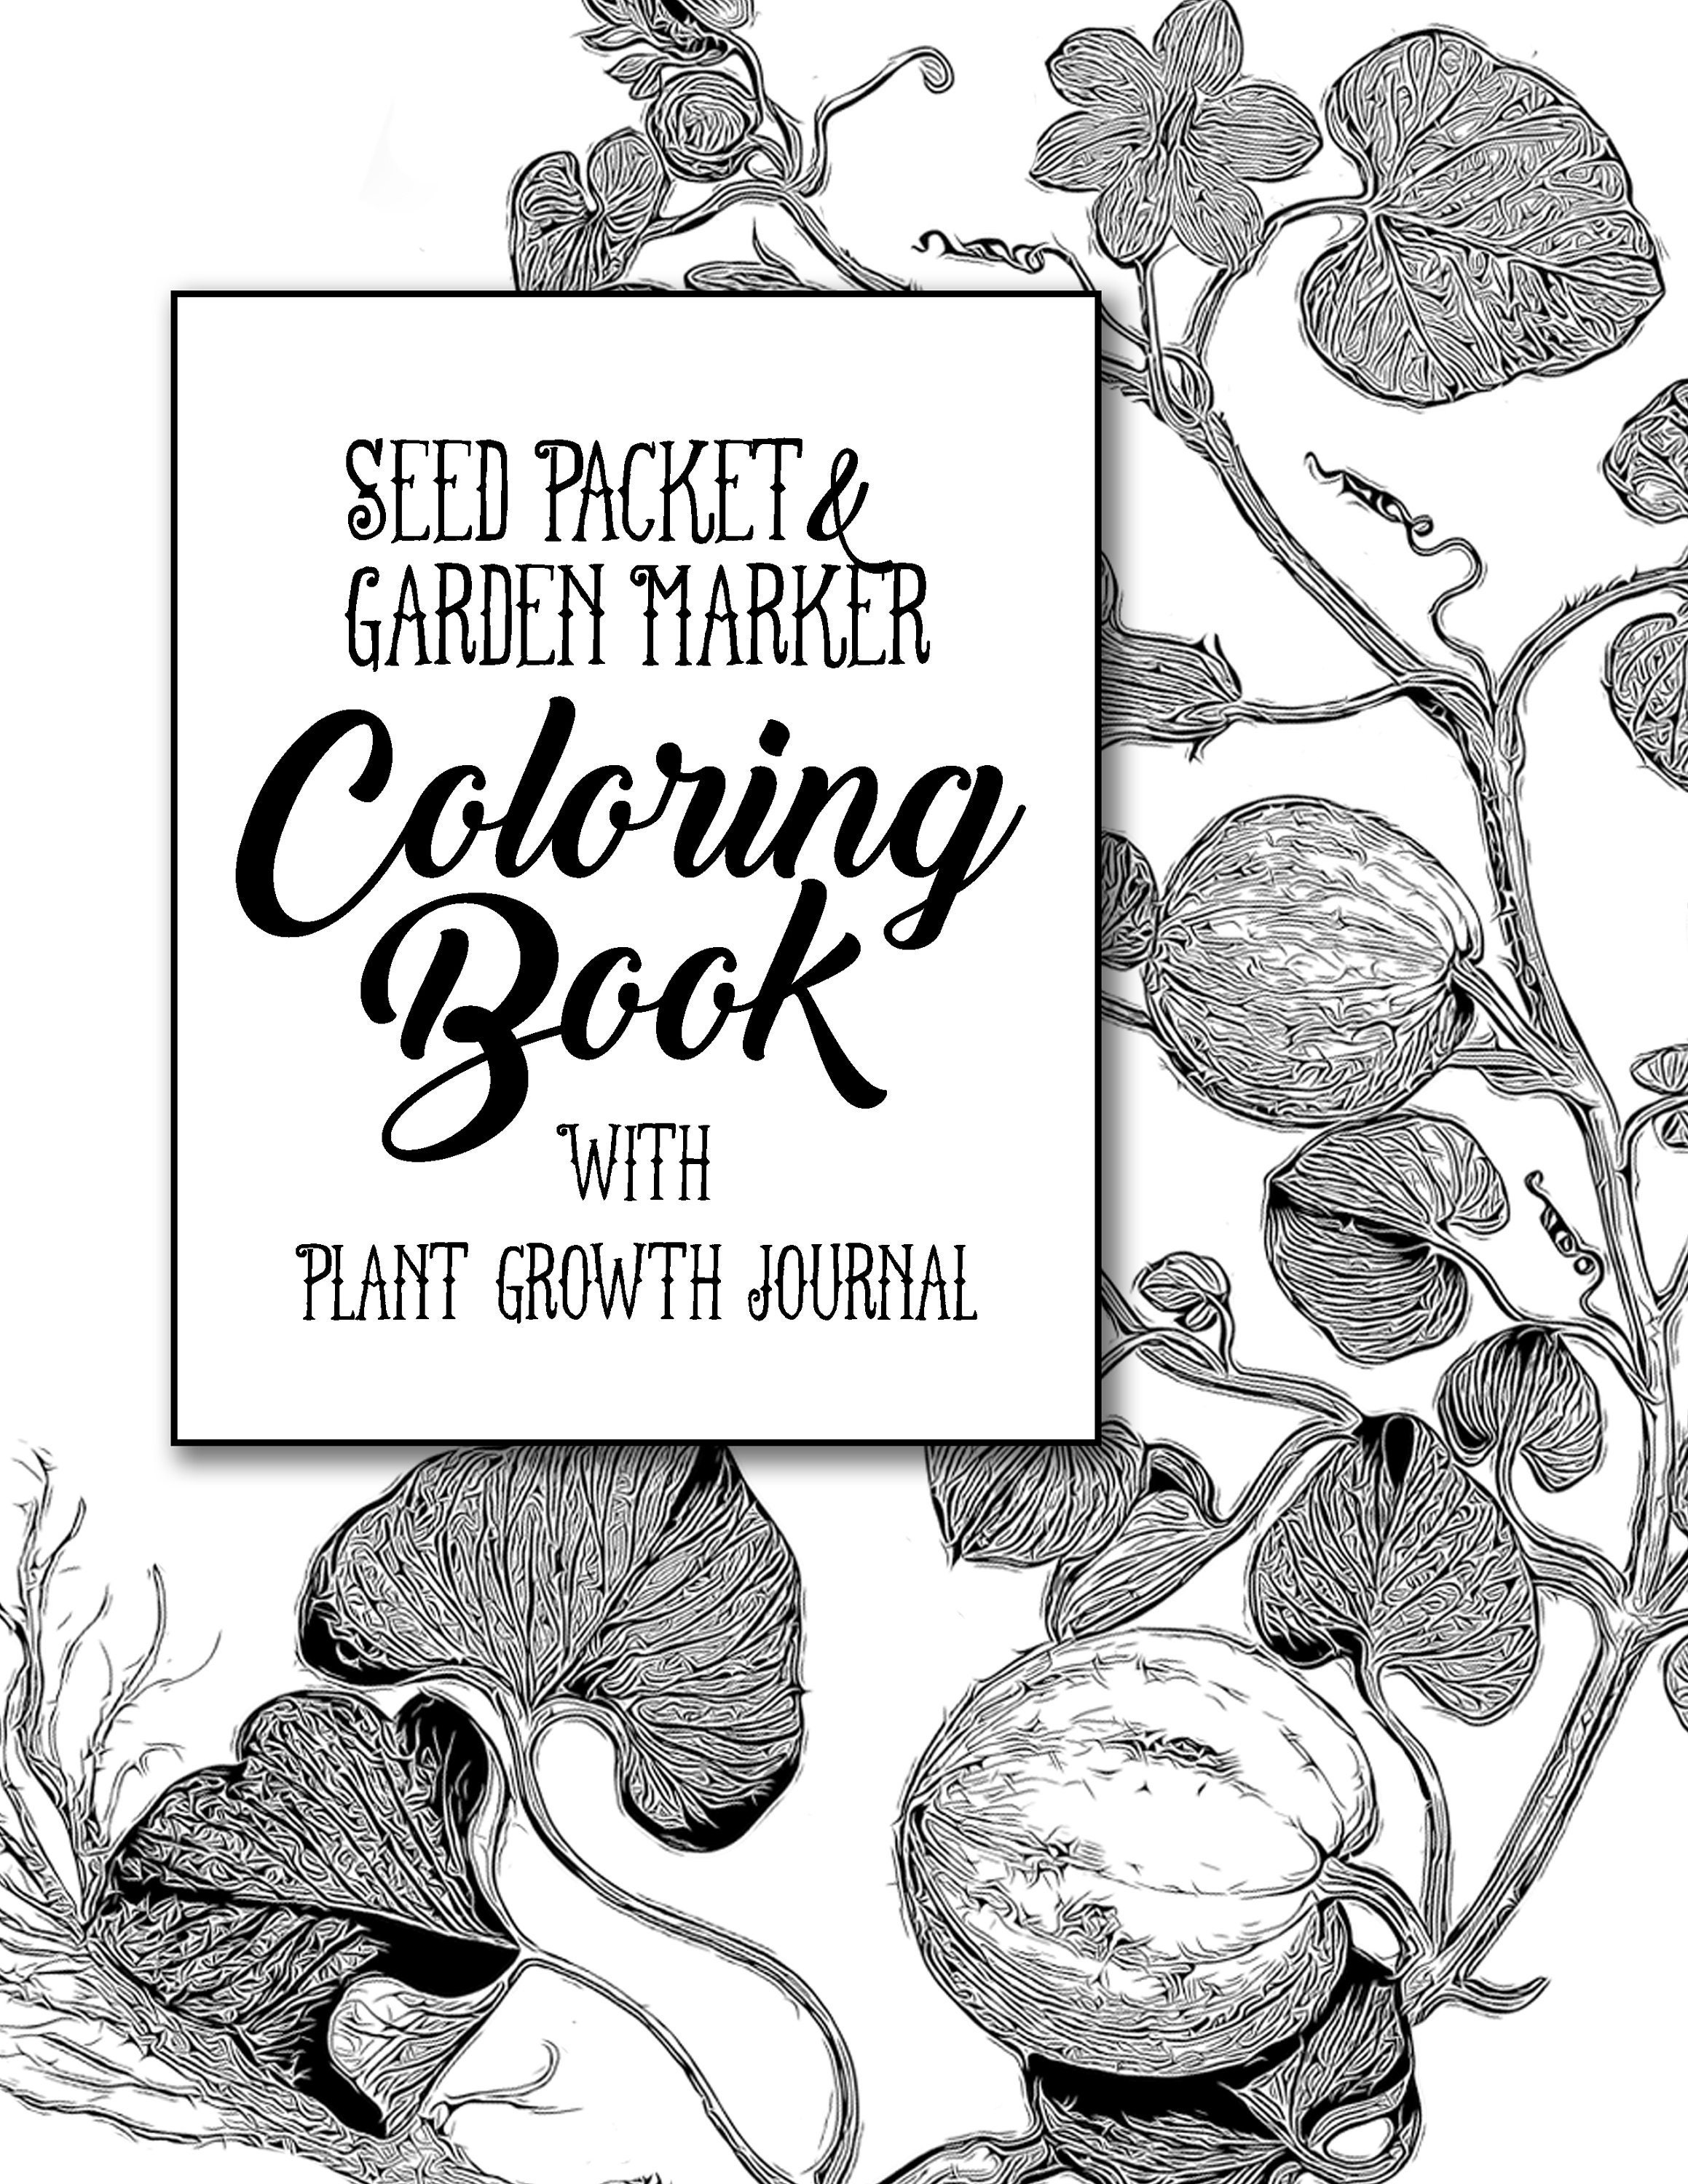 Seed Packet and Garden Marker Coloring Book With Plant Growth